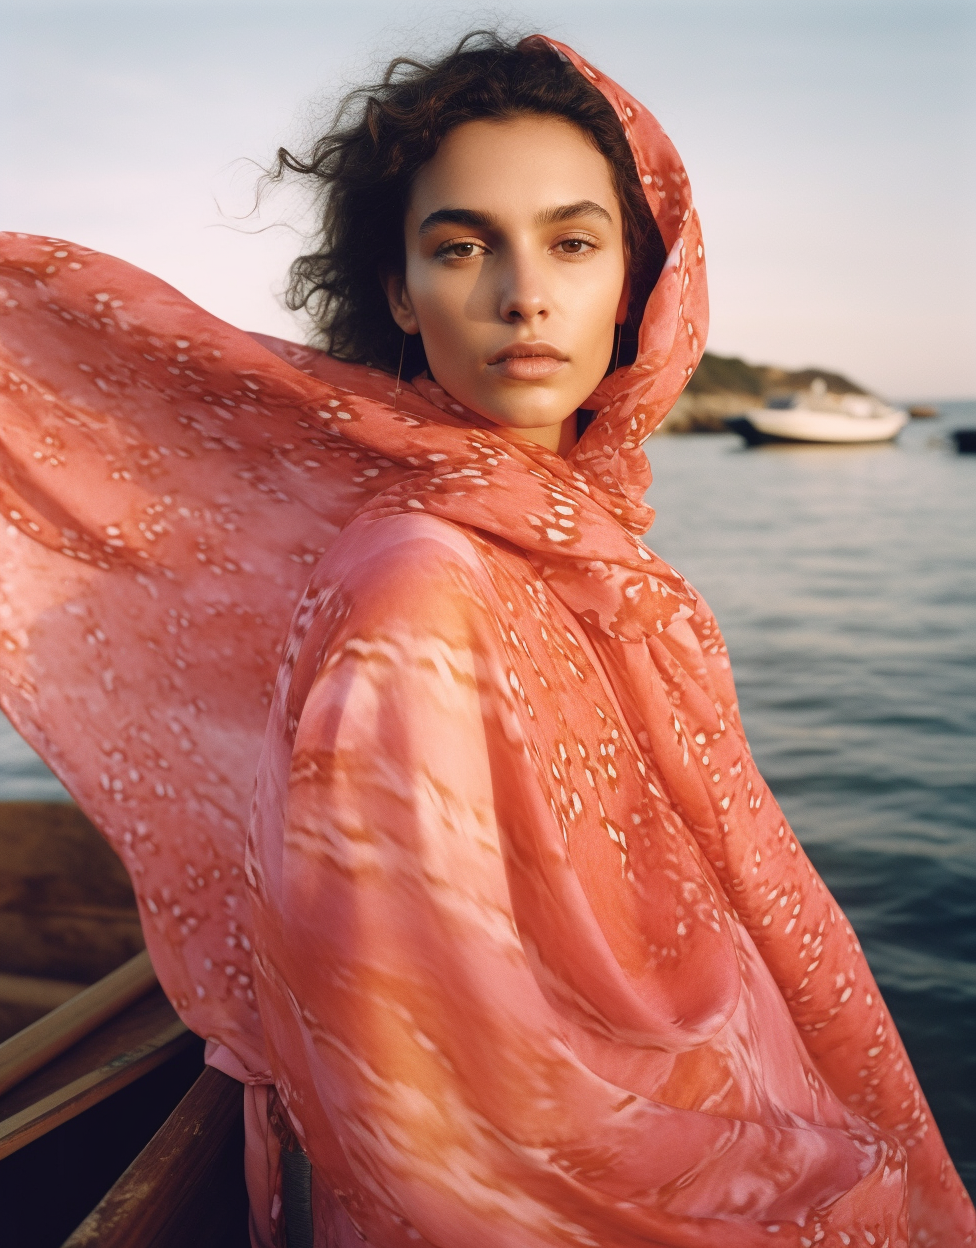 AI-generated image of a woman by the water wearing a pink and red patterned scarf, showcasing Mediterranean-inspired style with Midjourney